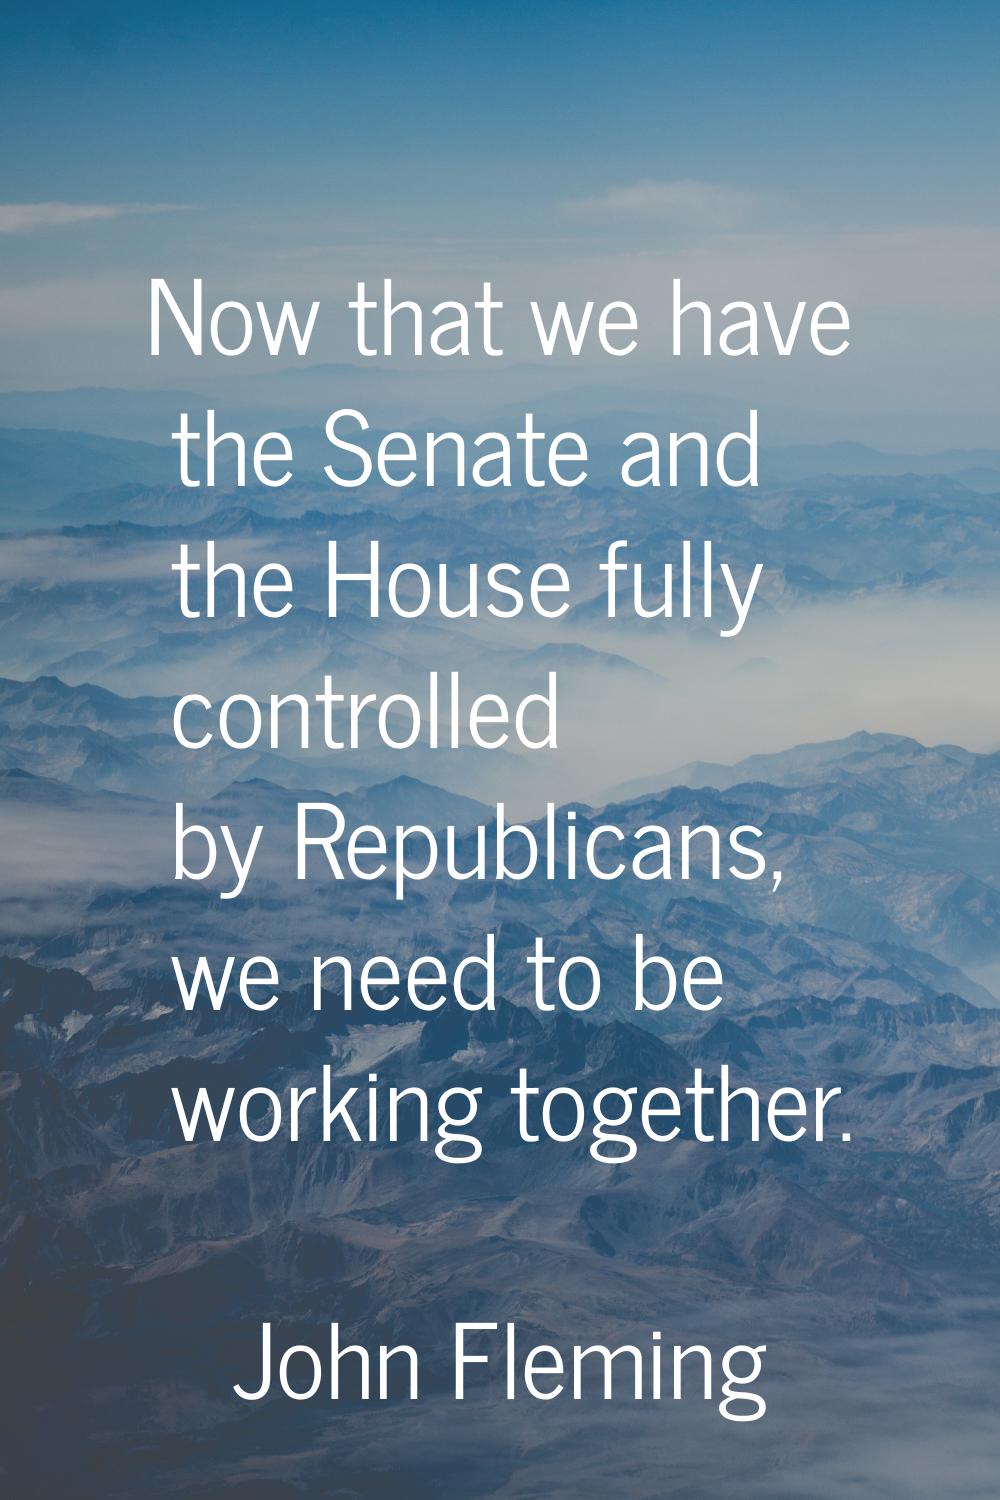 Now that we have the Senate and the House fully controlled by Republicans, we need to be working to